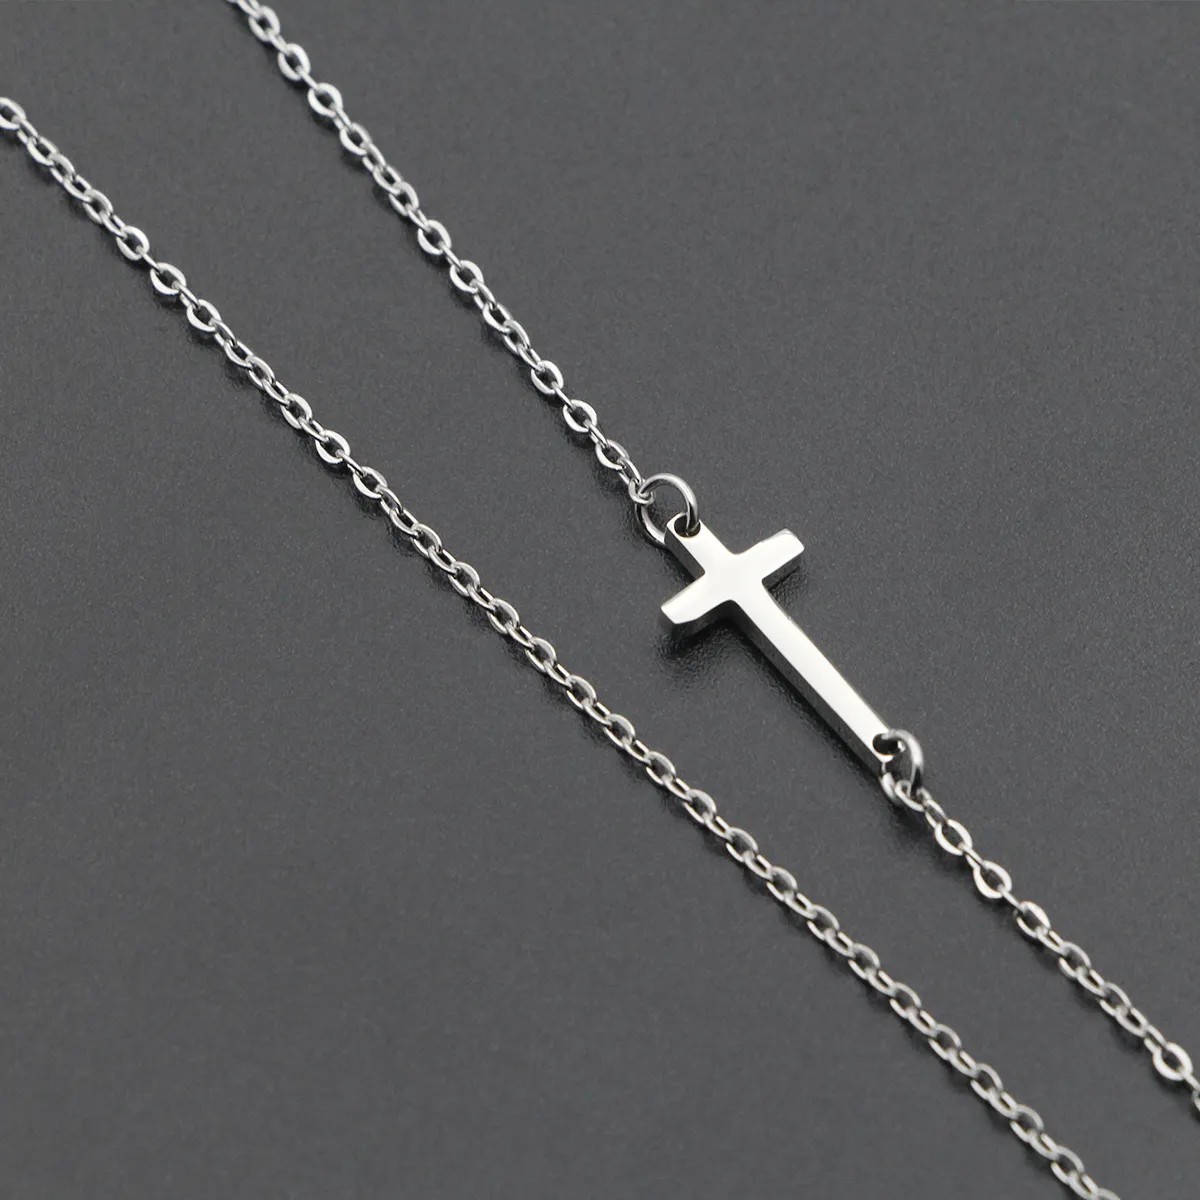 New Fashion Cross Pendant Necklace For Women Stainless Steel Faith Choker Necklace Gold Plated Religious Jewelry Gift